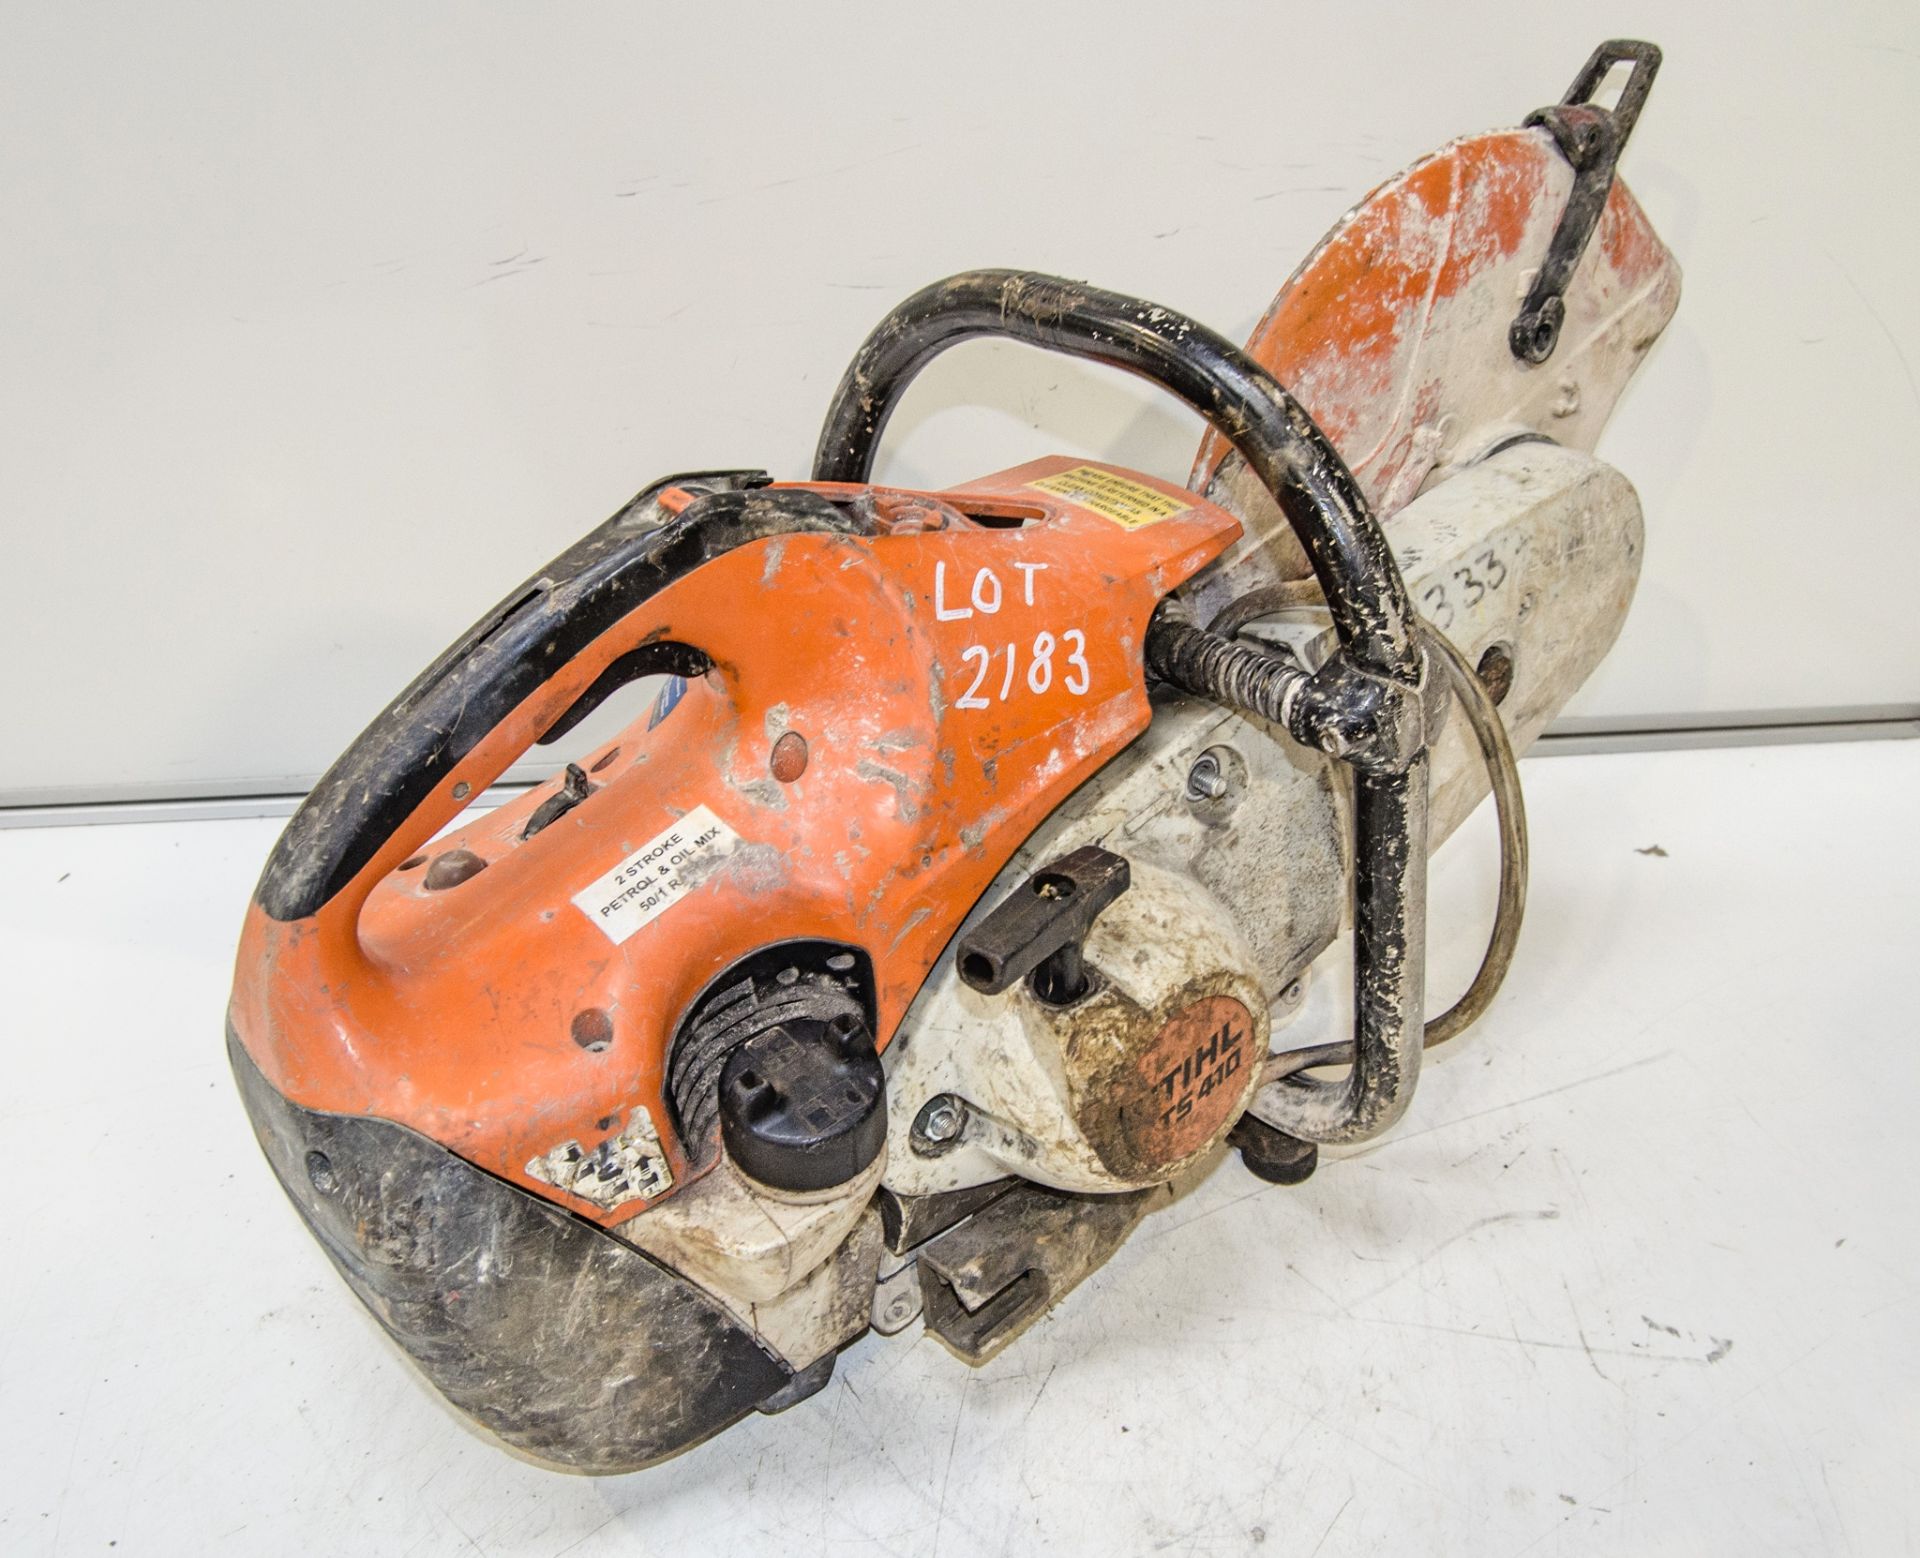 Stihl TS410 petrol driven cut off saw ** Spark plug lead & cover missing ** EXP3337 - Image 2 of 2